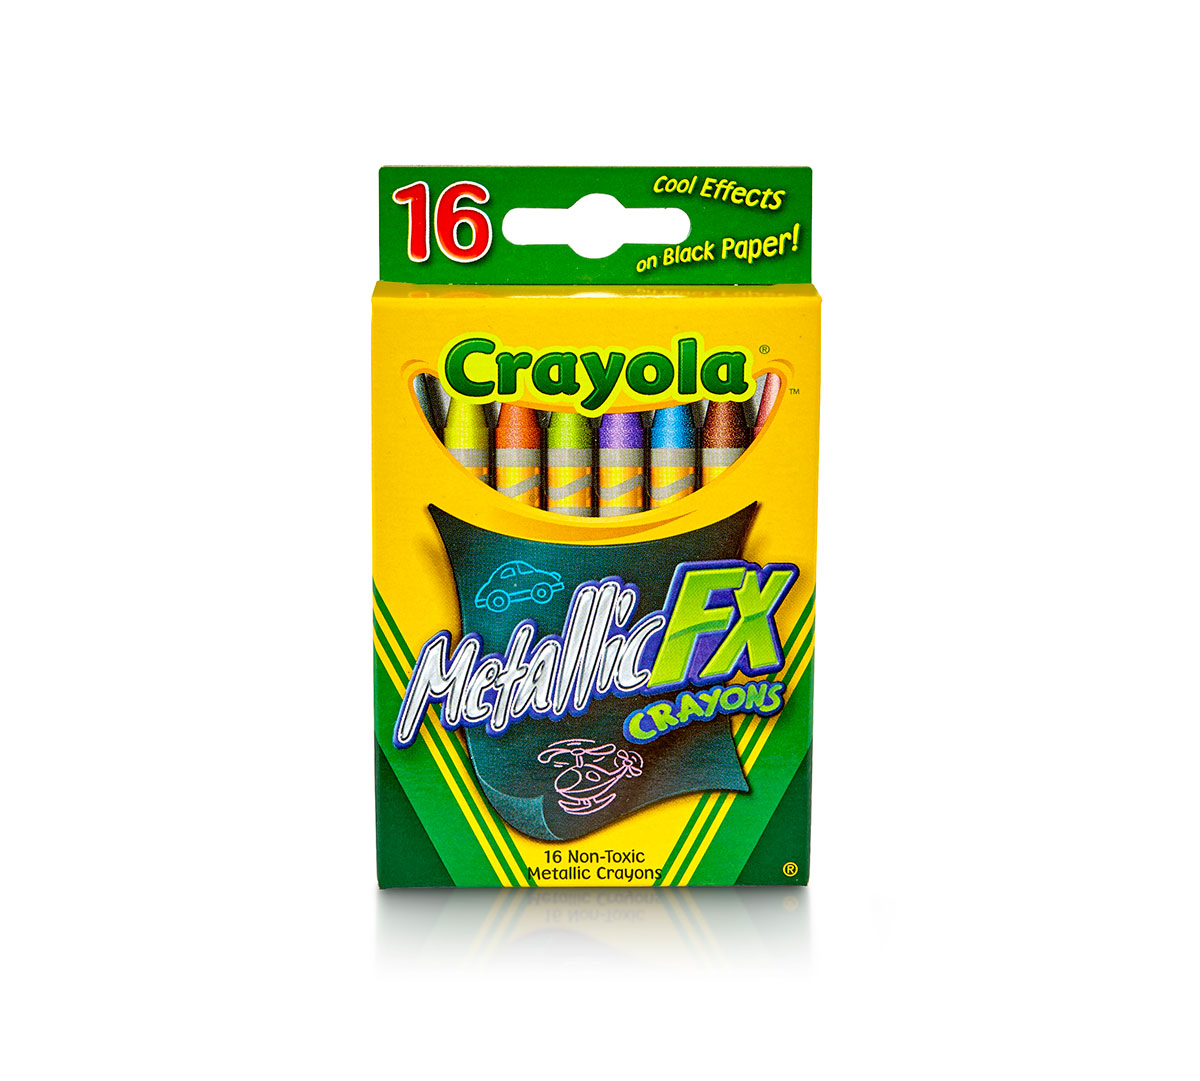 Crayola Metallic FX Crayons Great Coloring Bundle 16 Count Crayola Construction Paper Crayons Assorted Colors Includes 5 Color Flag Set 16 Count 